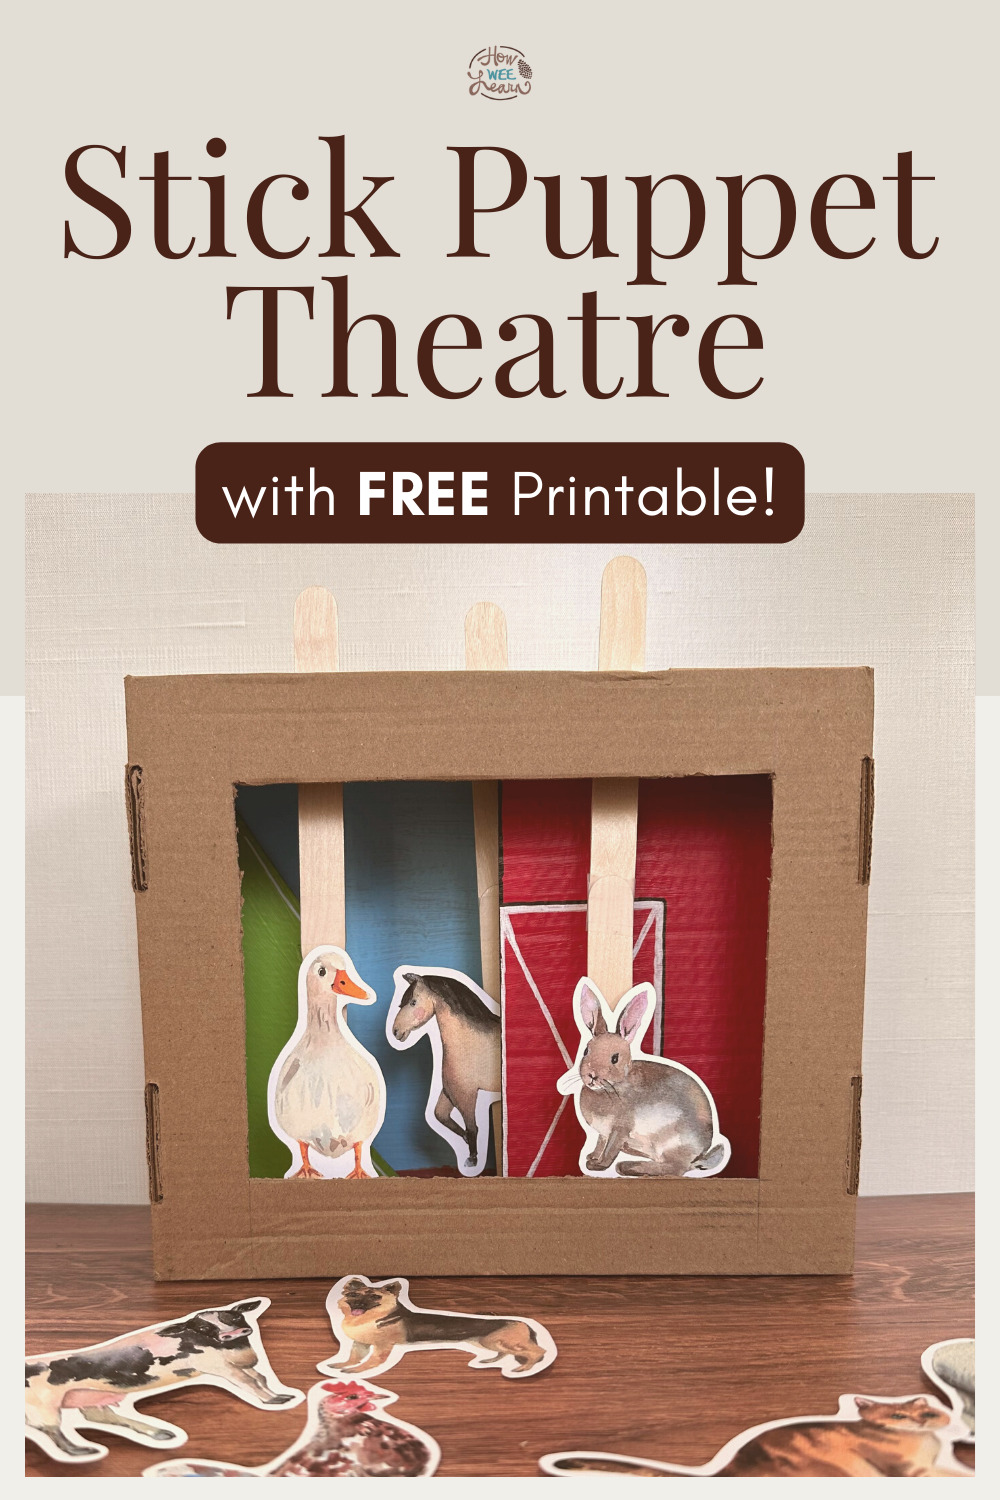 DIY Farm Animal Stick Puppet Theatre with FREE Stick Puppets Printable